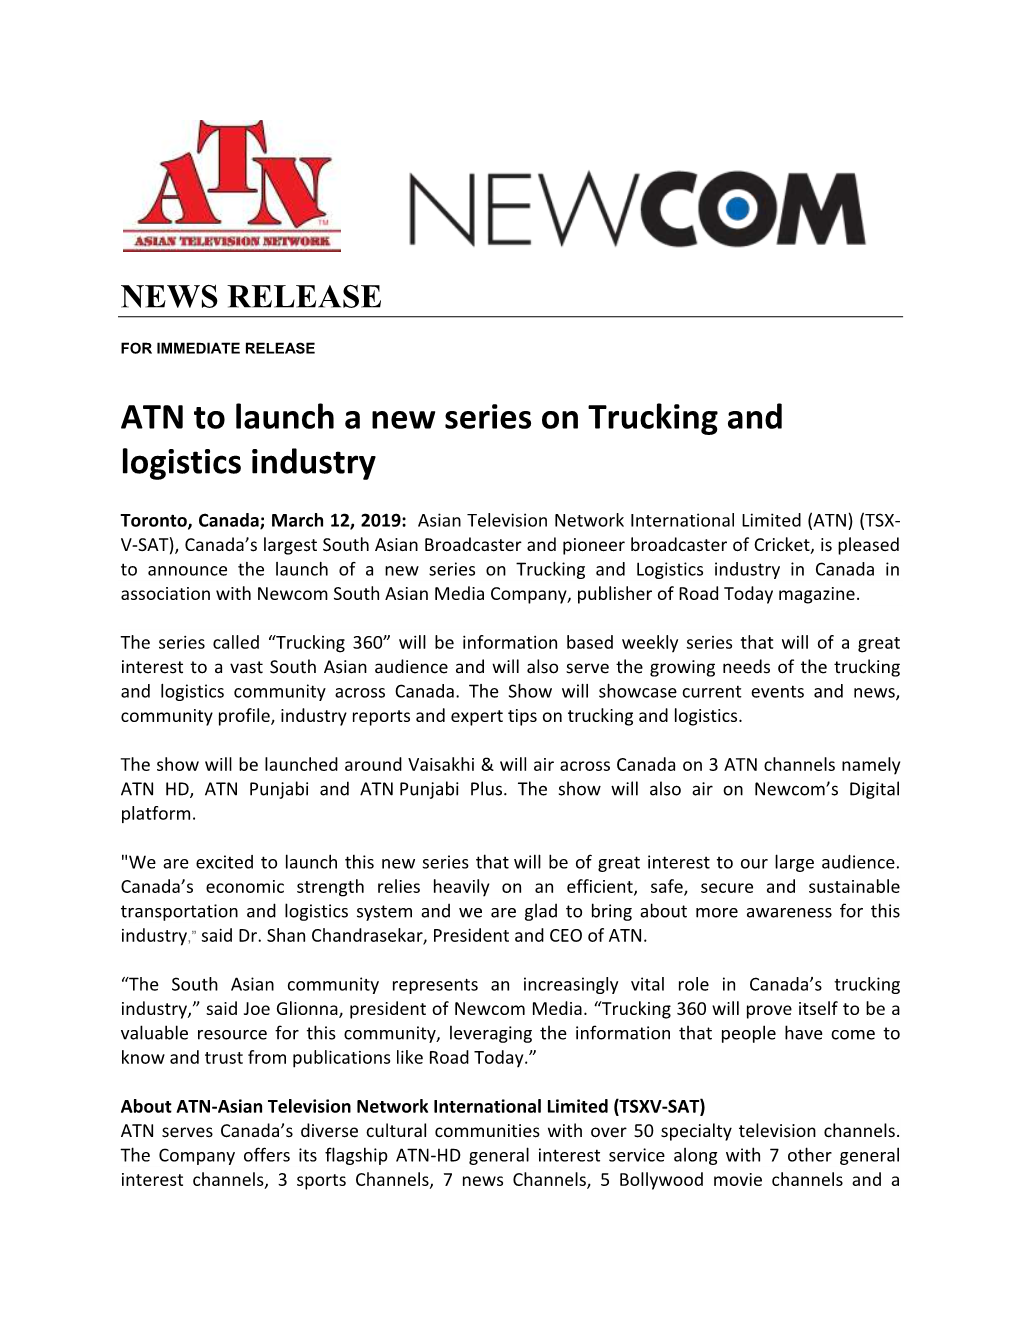 ATN to Launch a New Series on Trucking and Logistics Industry